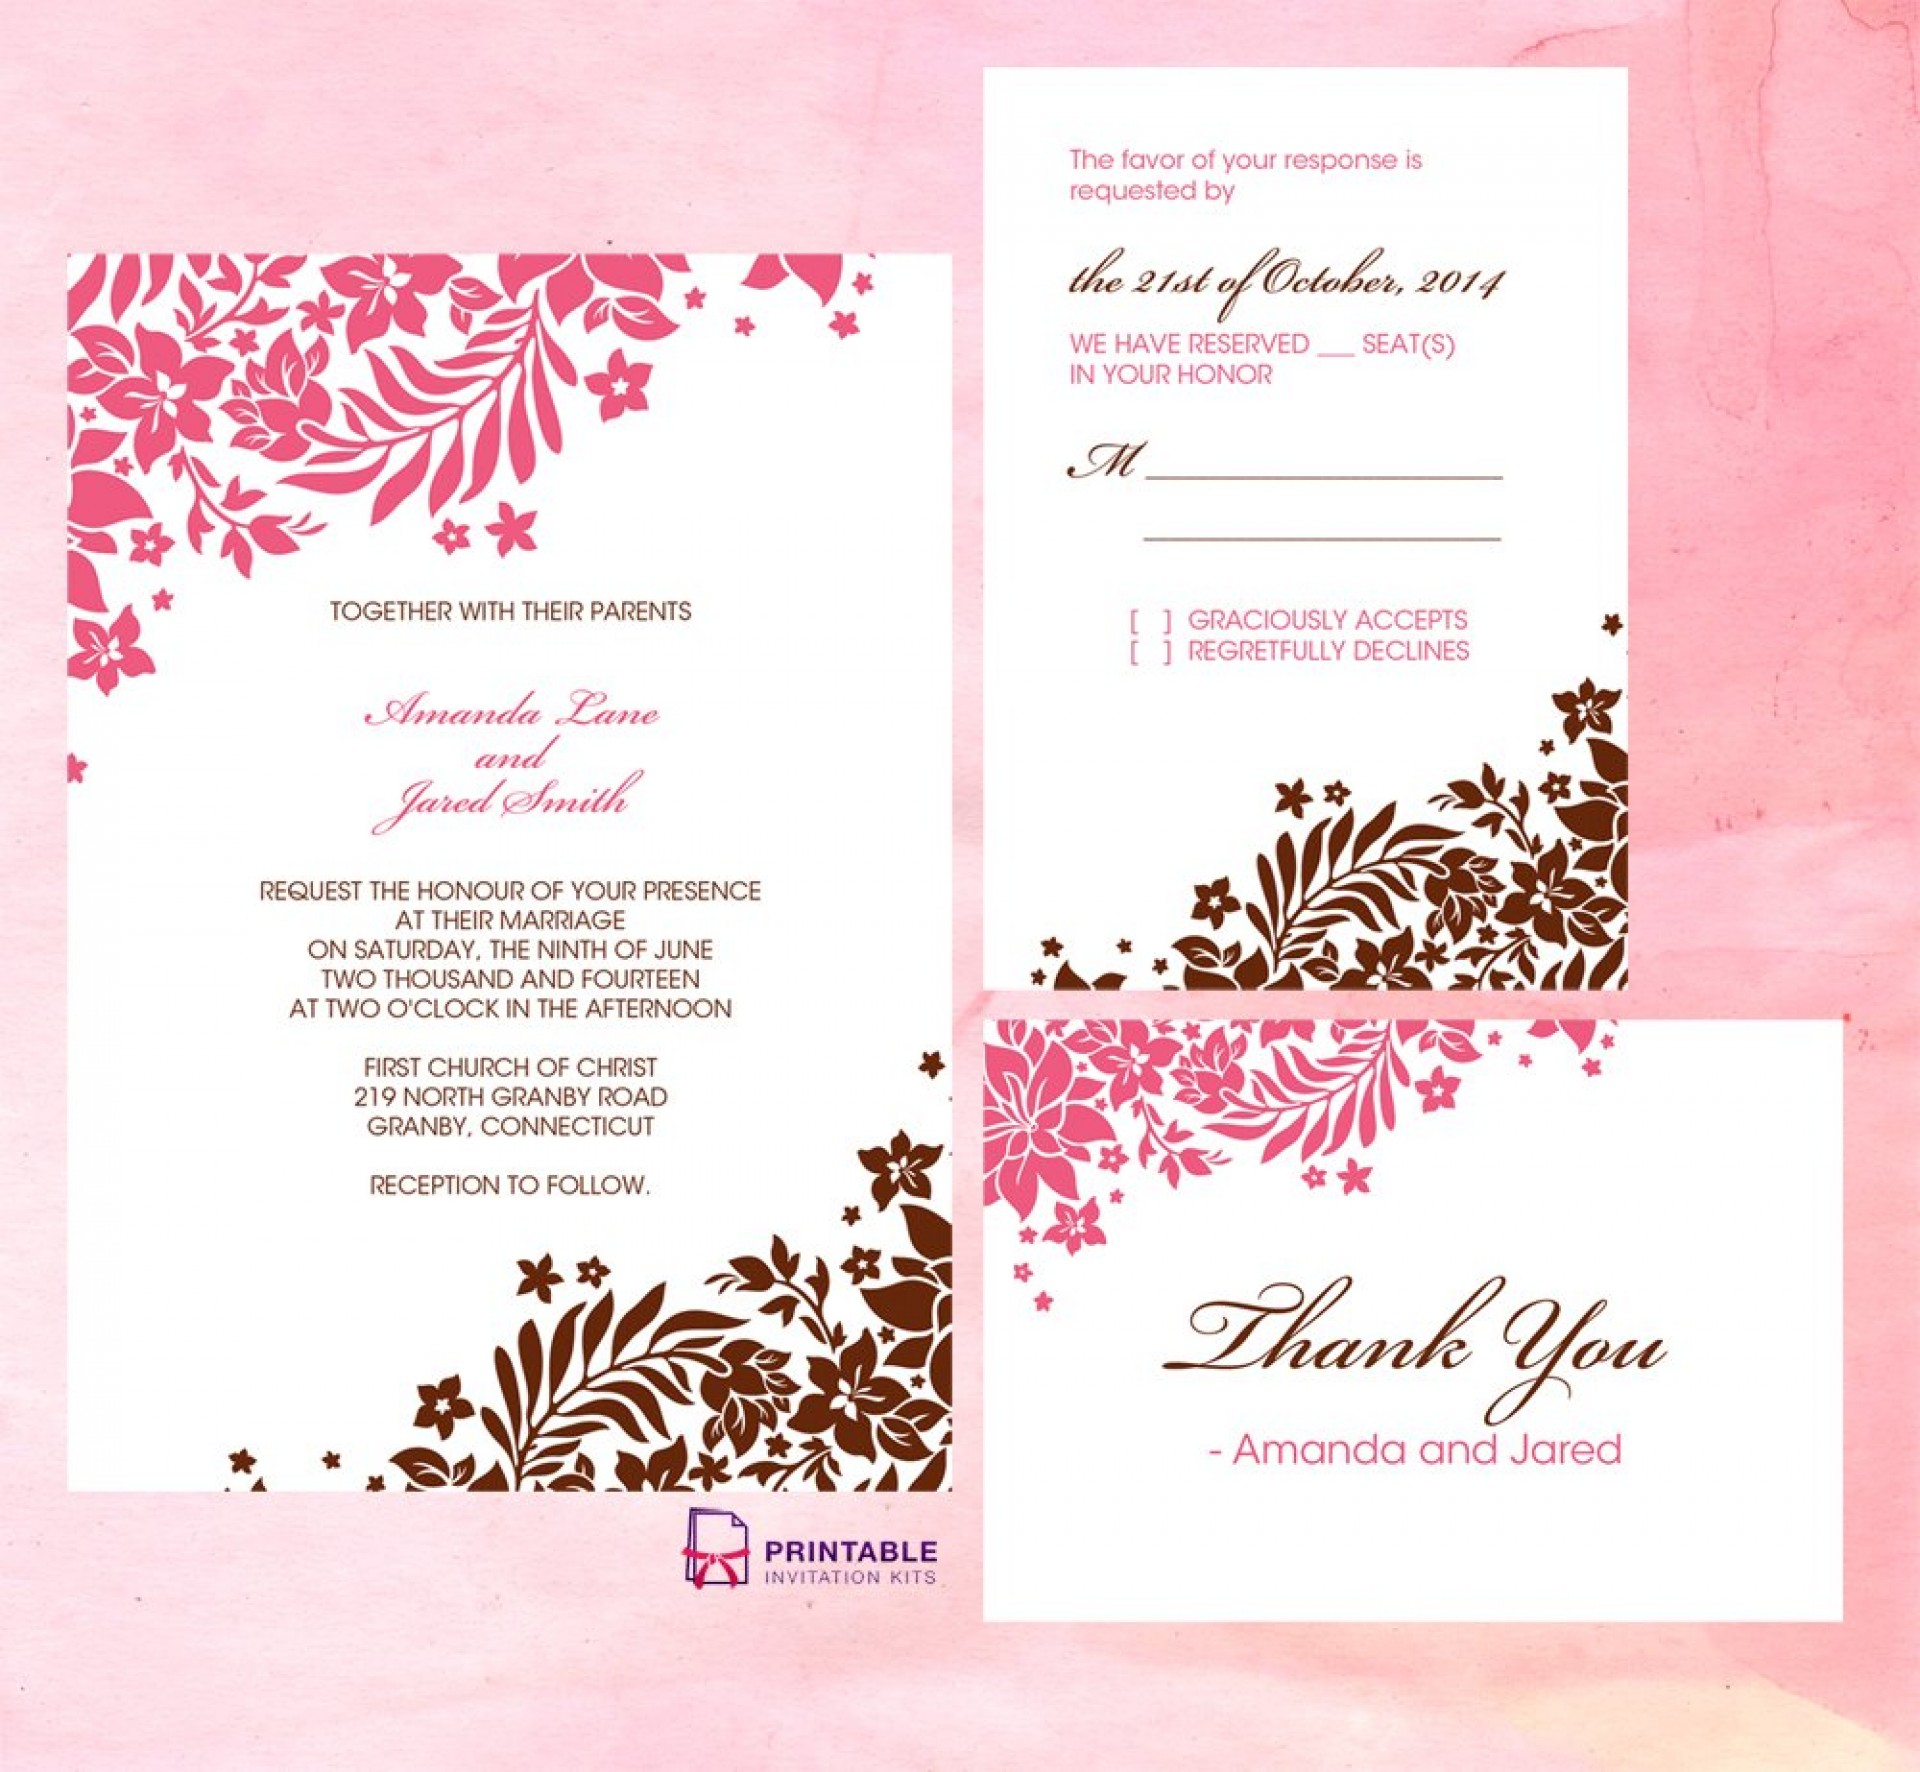 Wedding Invitation Templates Free Download Remarkable Free ...